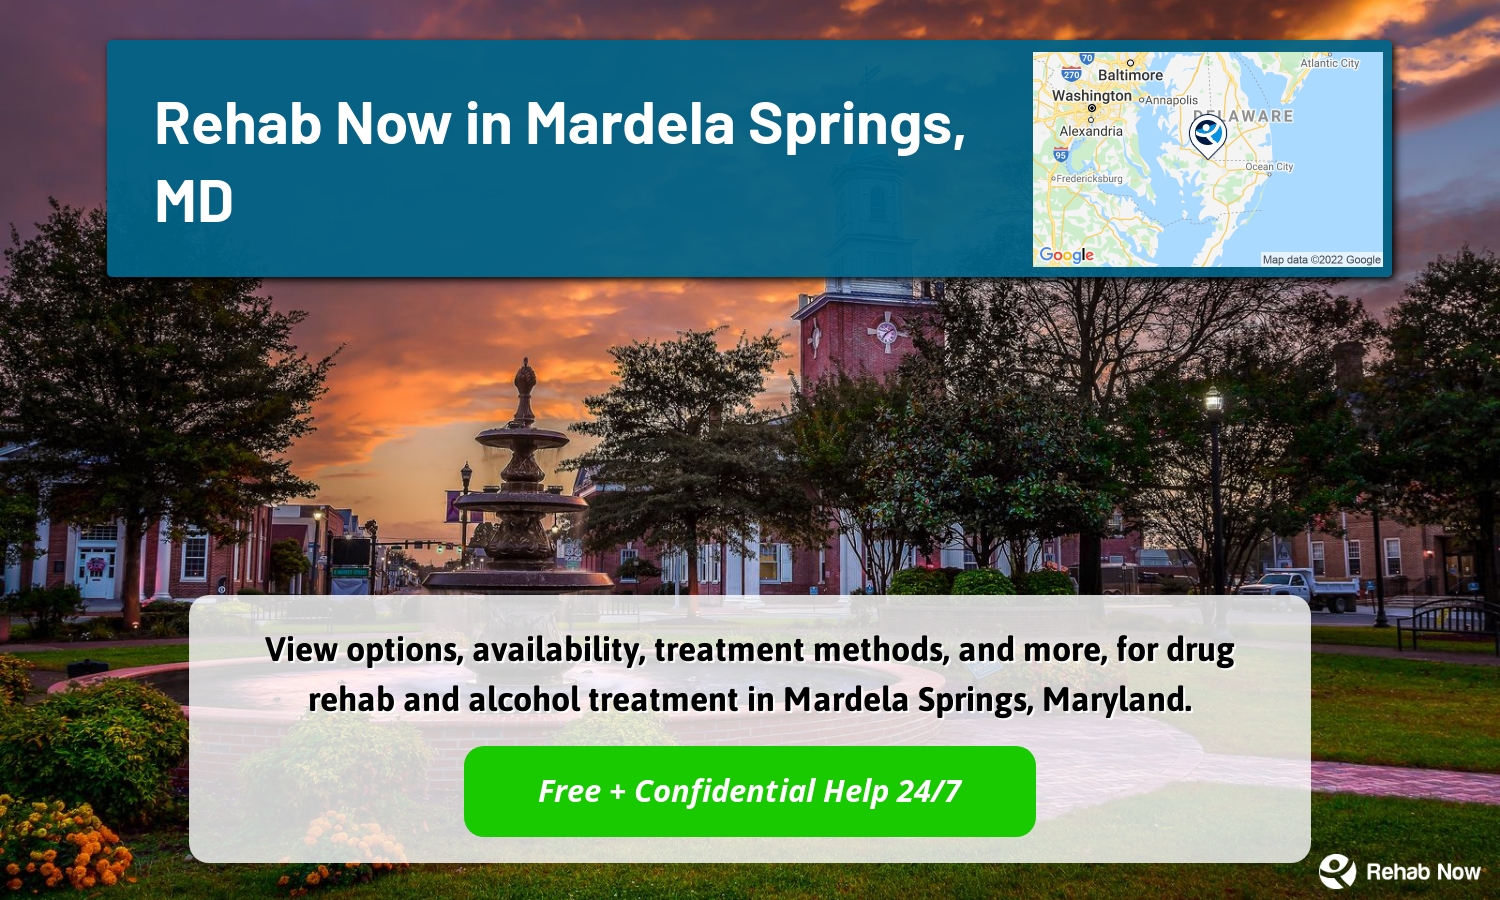 View options, availability, treatment methods, and more, for drug rehab and alcohol treatment in Mardela Springs, Maryland.